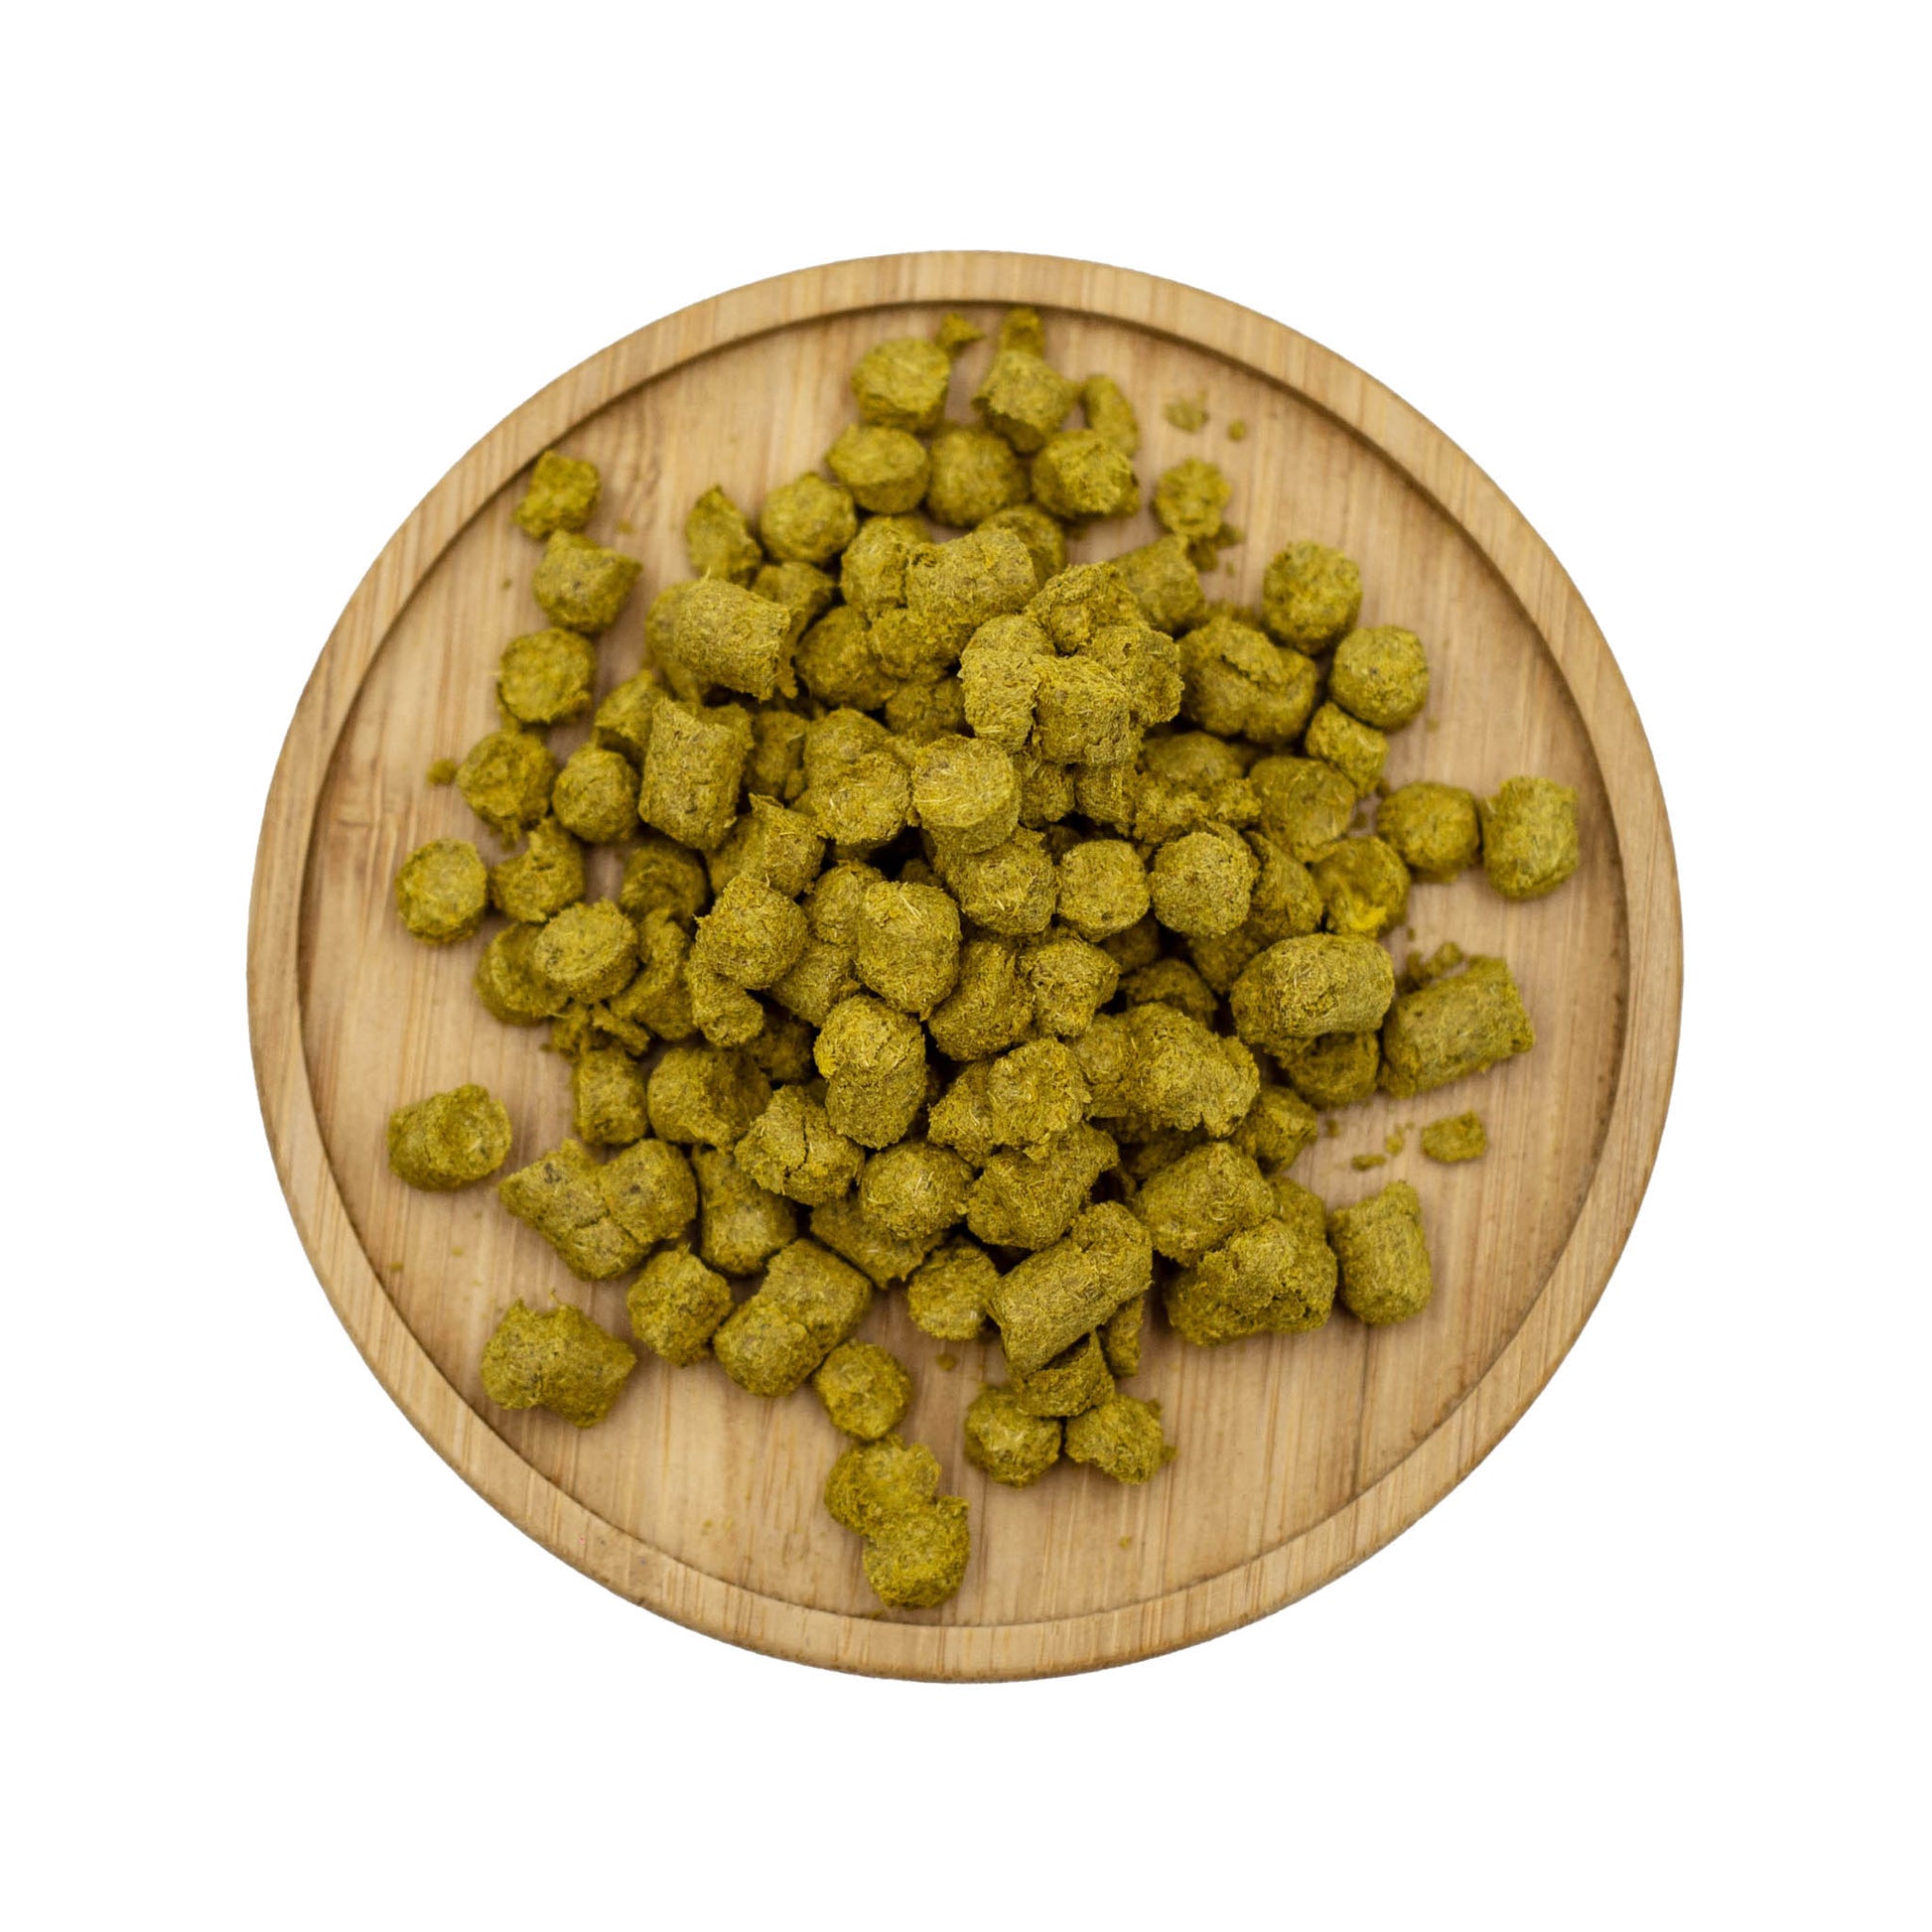 50g packet of Galaxy hop pellets for beer making